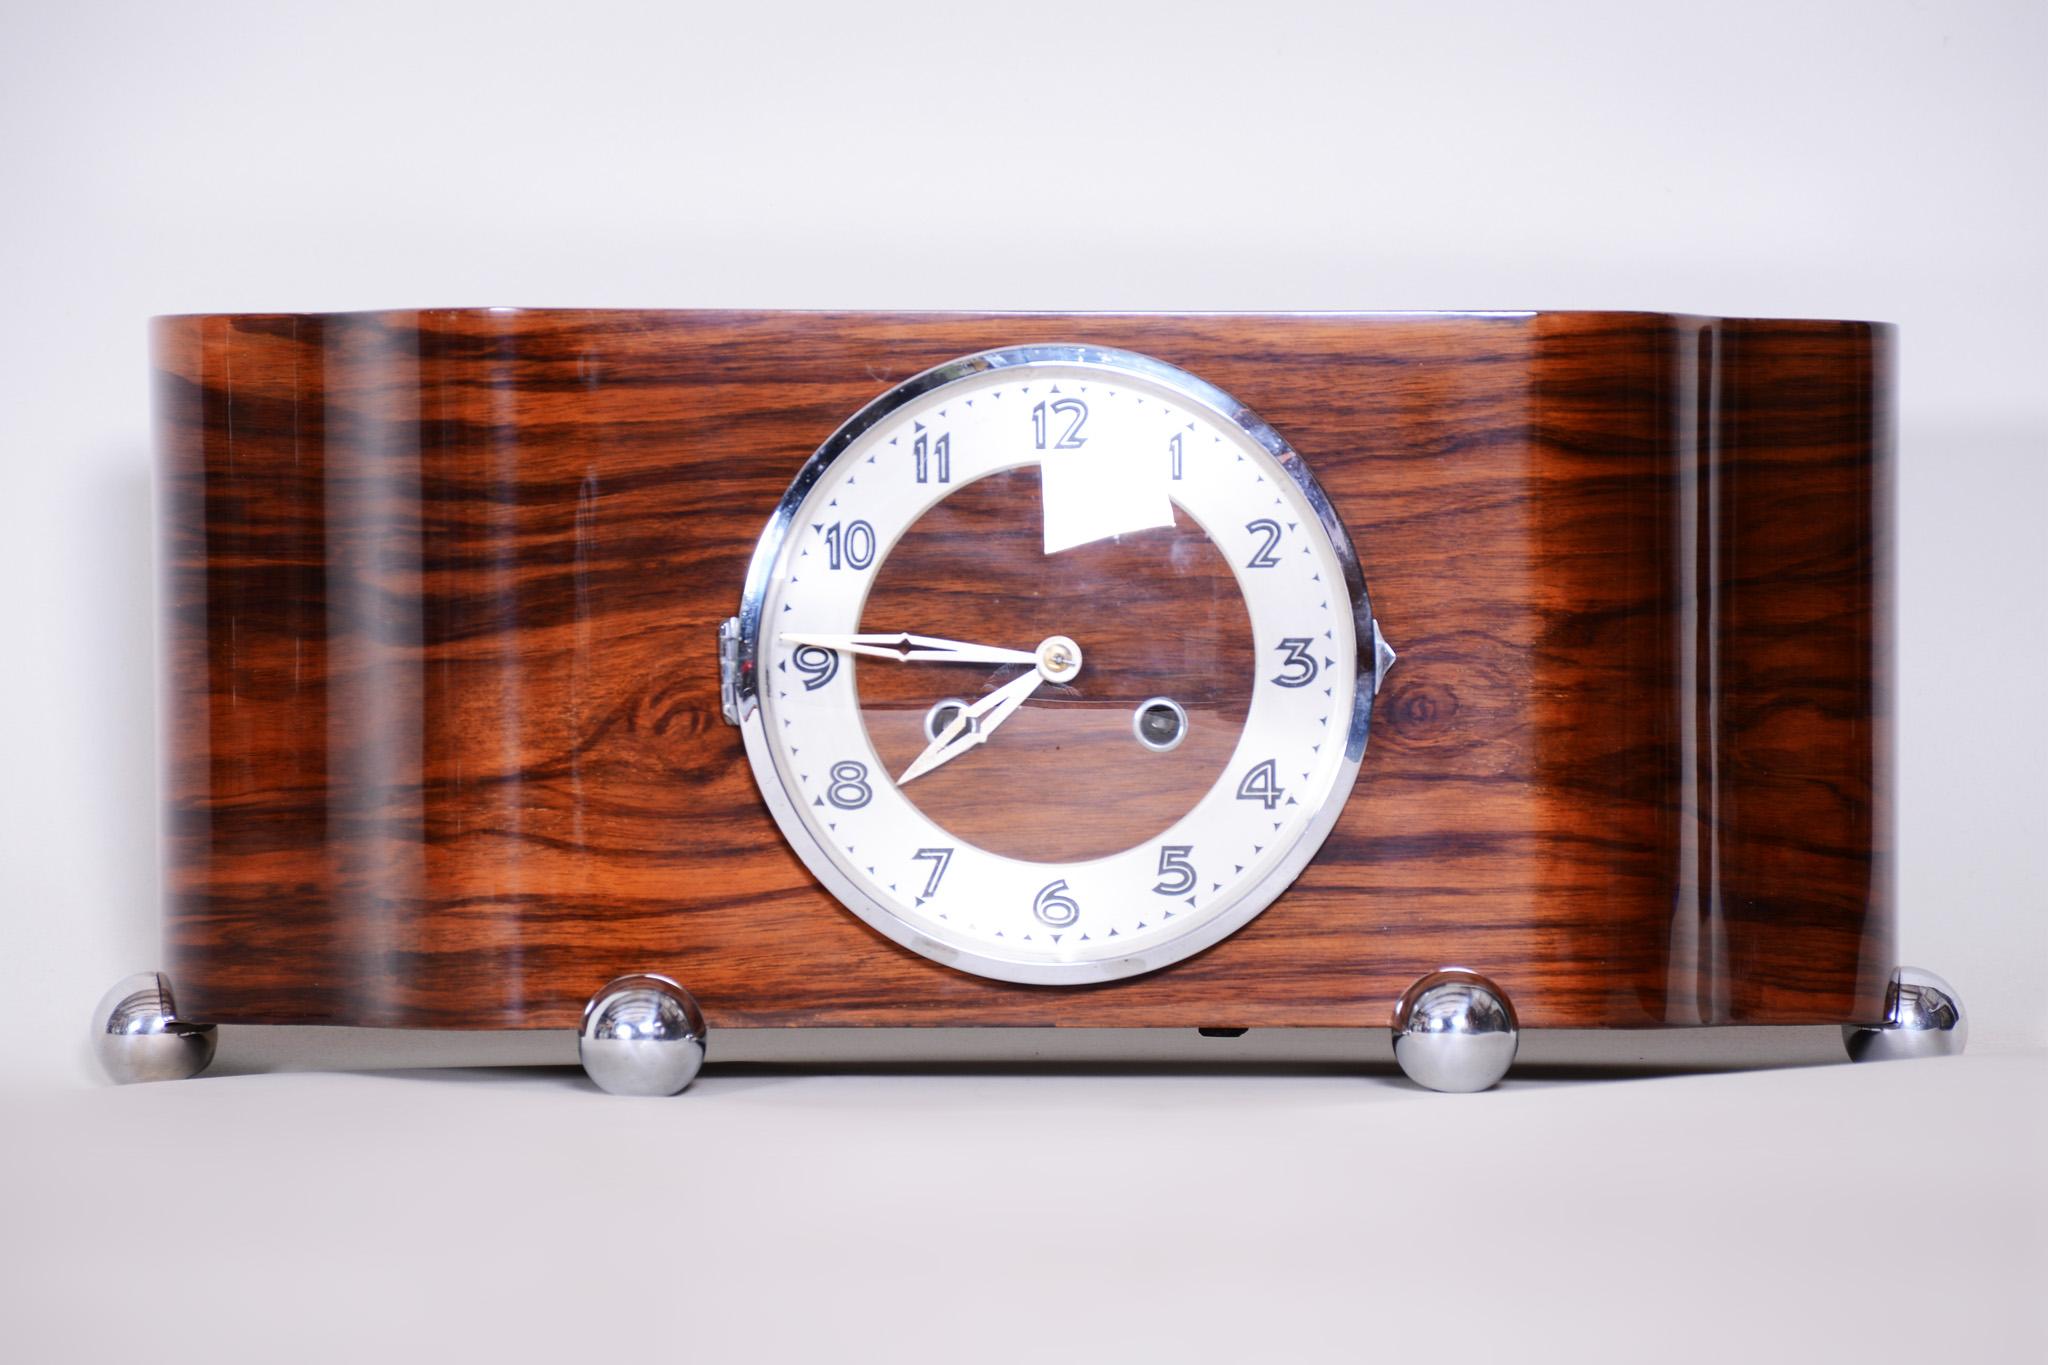 Completely restored, including a clock machine.
The clock strikes in half and o clock.

Material: Walnut
Period: 1930-1939
Source: Czechia (Czechoslovakia).